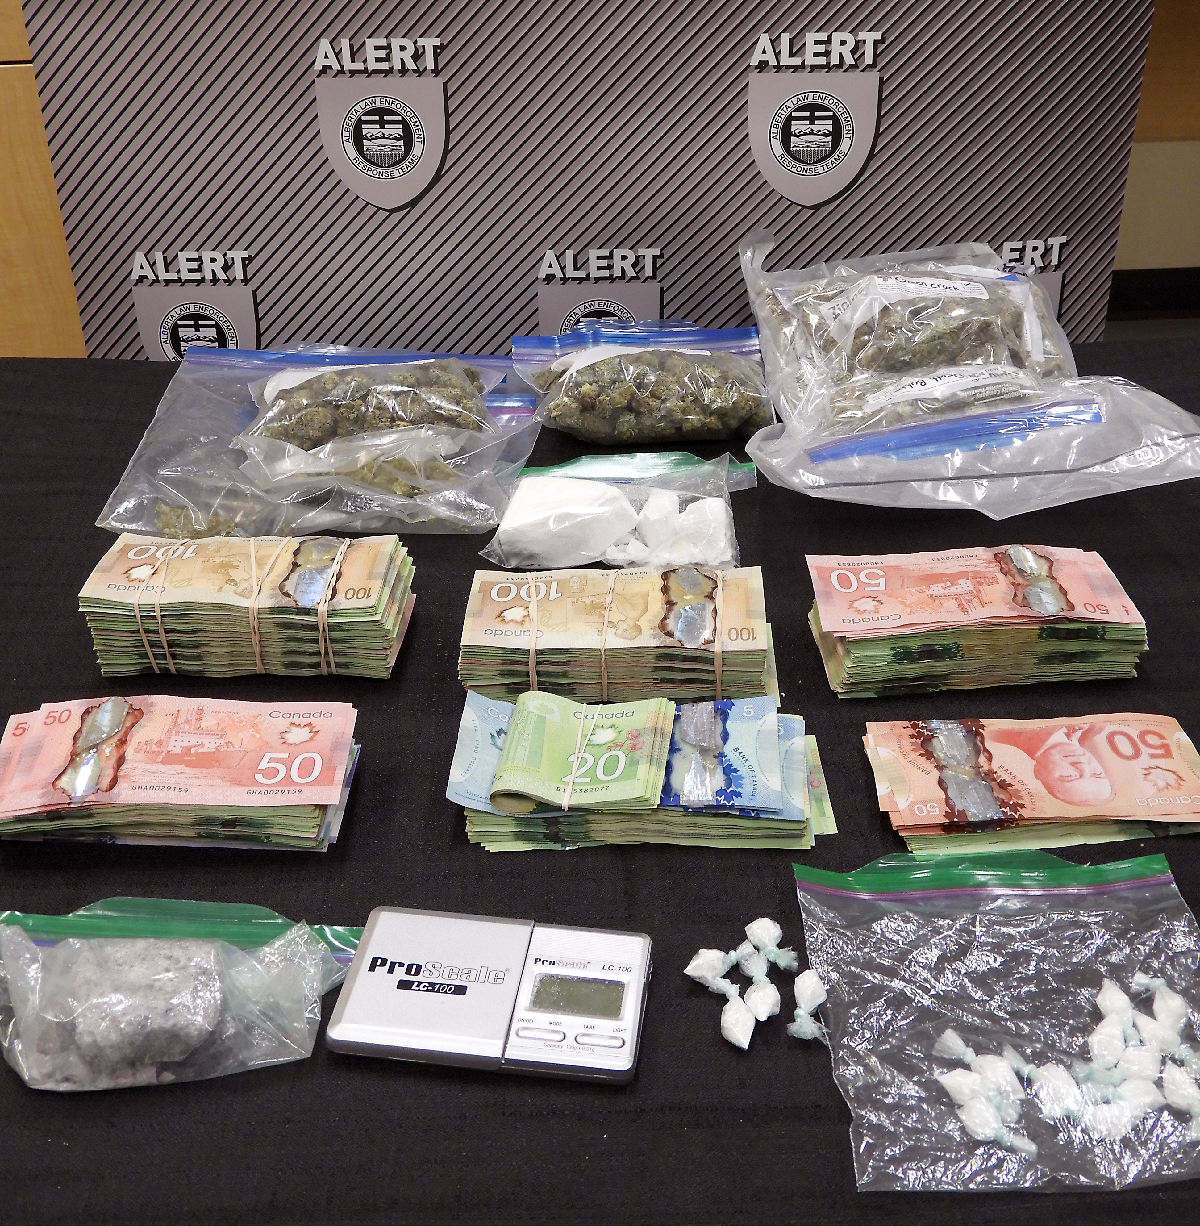 Police in Fort McMurray reportedly seized more than $58,000 in drugs and cash from a home in the northern Alberta city on April 17, 2019.